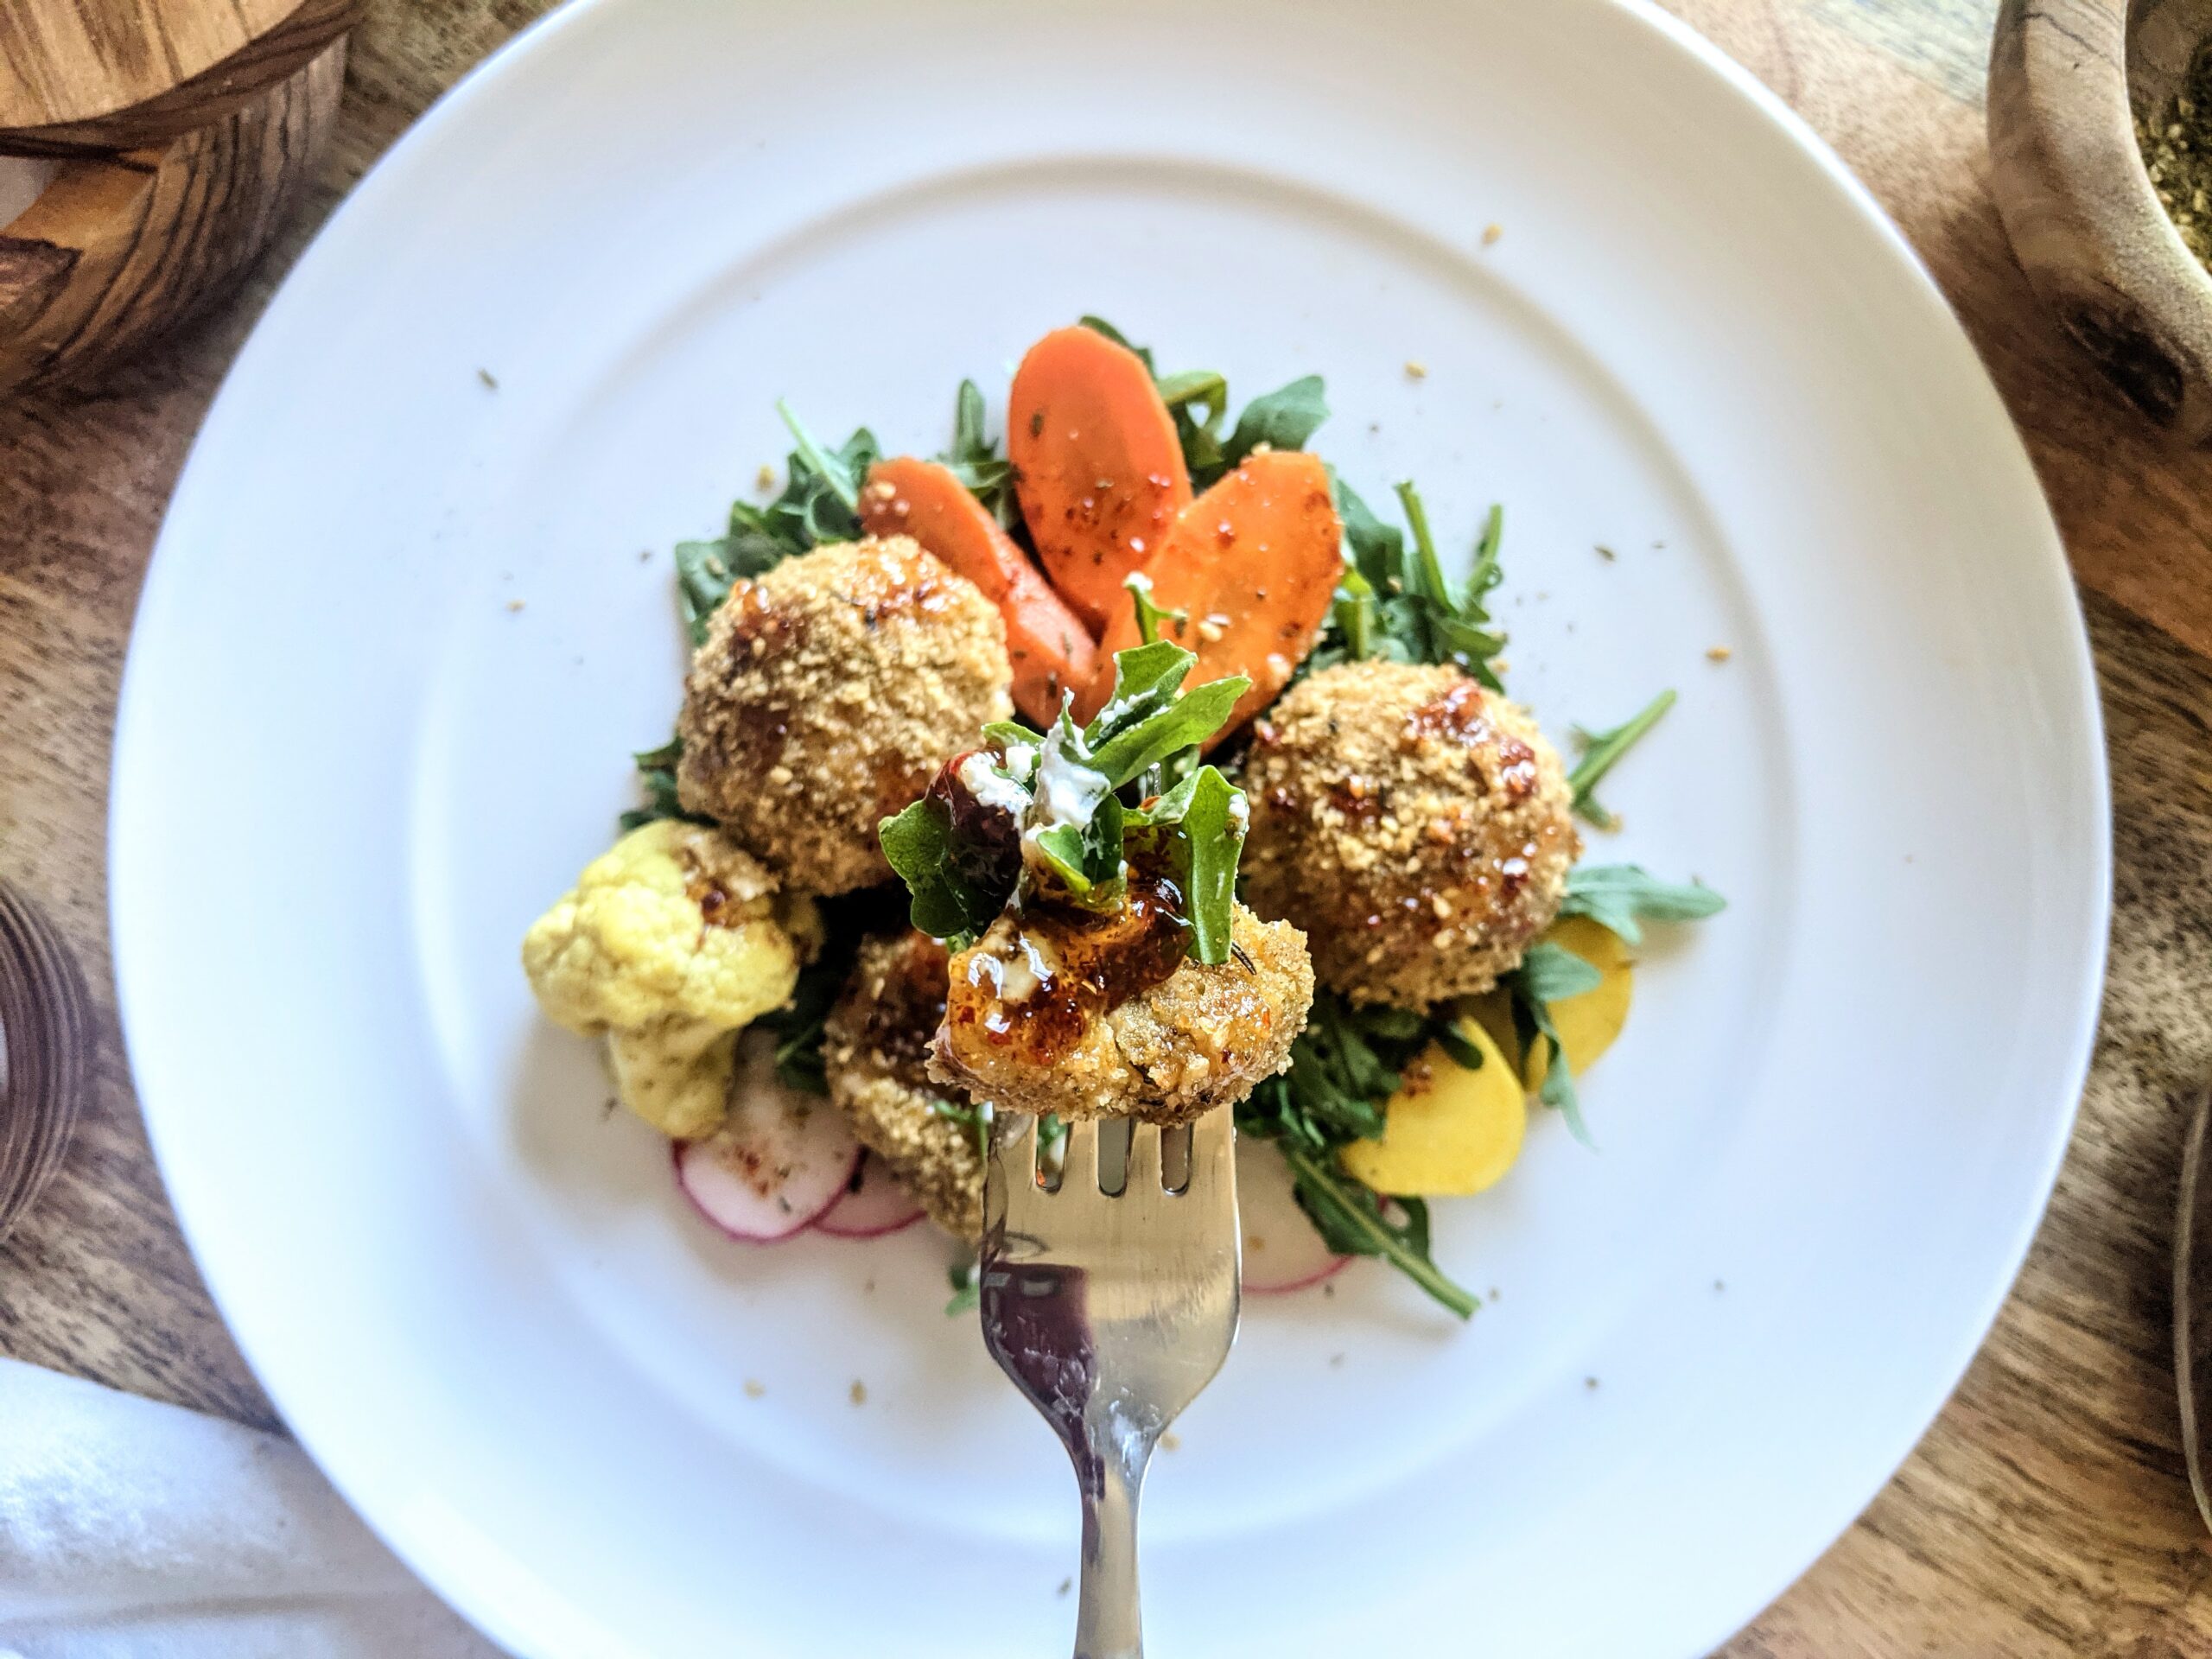 A trio of walnut and za'atar crusted baked-creamy goat cheese balls. Served on top of homemade curried carrot and cauliflower pickles and wild arugula.